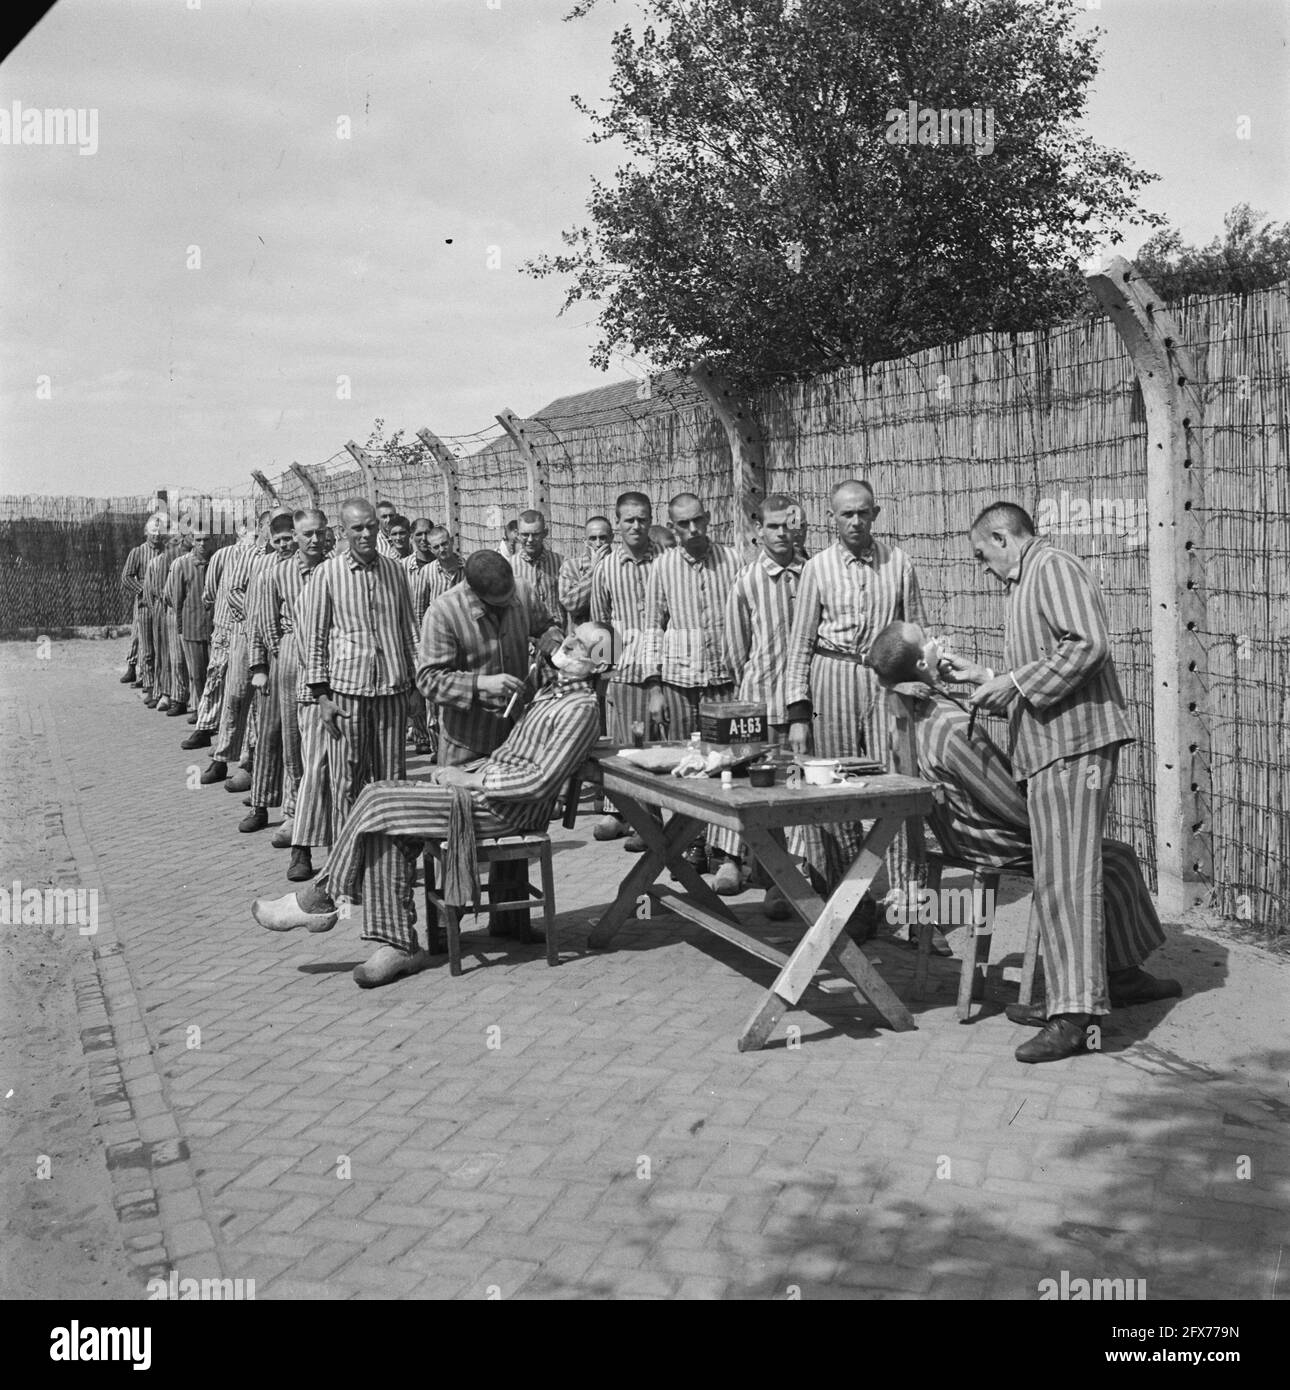 In the penal camp at Vught, 7,000 Dutch collaborators and traitors are locked up. Soldiers of the Dutch Stoottroepen are in charge of the security, especially of the 300 Dutch SS men. Led by the camp commander, Major L. Mennes, and his aides, these prisoners are used to clear the area around Vught of land mines, among other things. They were dressed in the blue and white striped prisoner's uniforms of the former Dutchmen captured by the Germans. The prisoners receive the minimum civilian ration, which is also reduced because all delicacies have been taken off. They spend their days here under Stock Photo